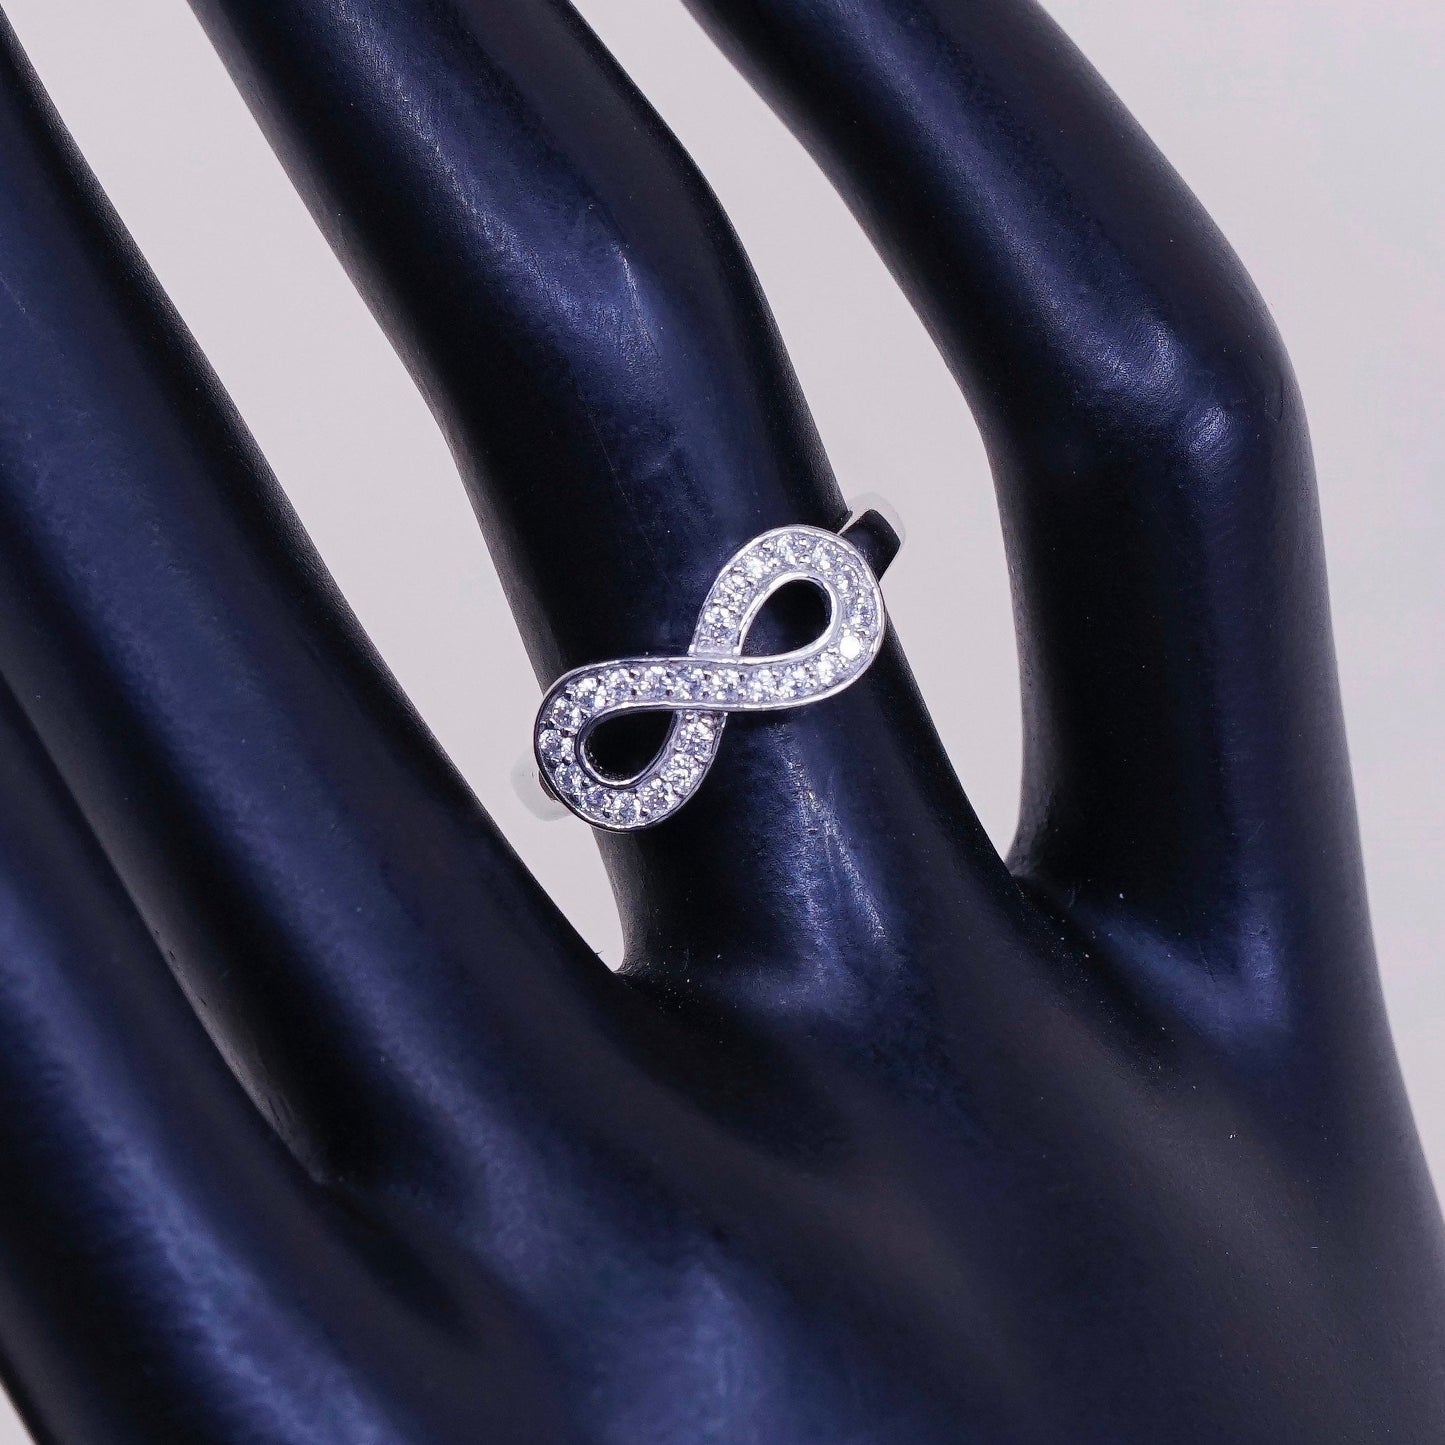 Size 5, vtg sterling 925 silver handmade ring, infinity symbol ring with cz